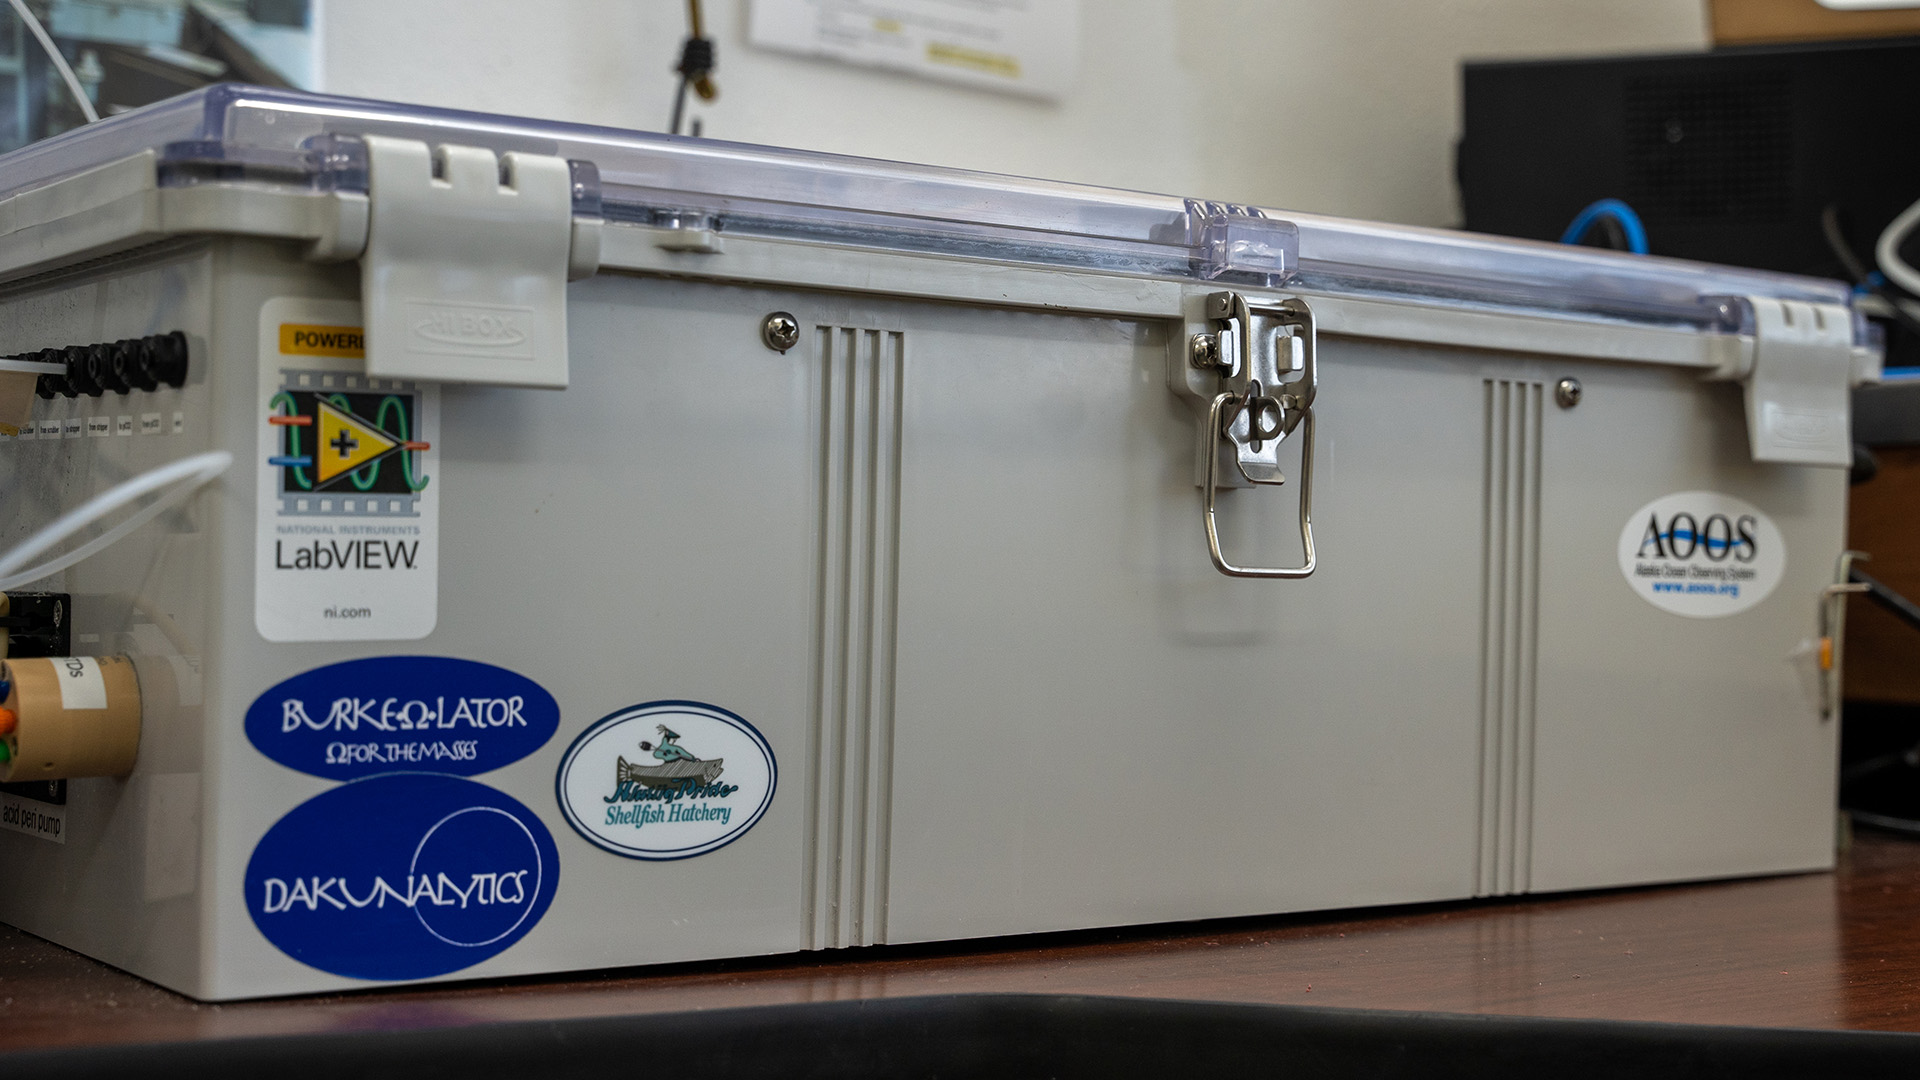 The Burk-o-Lator in the ocean acidification research lab at APMI measures a variety of oceanographic parameters. Image by APMI